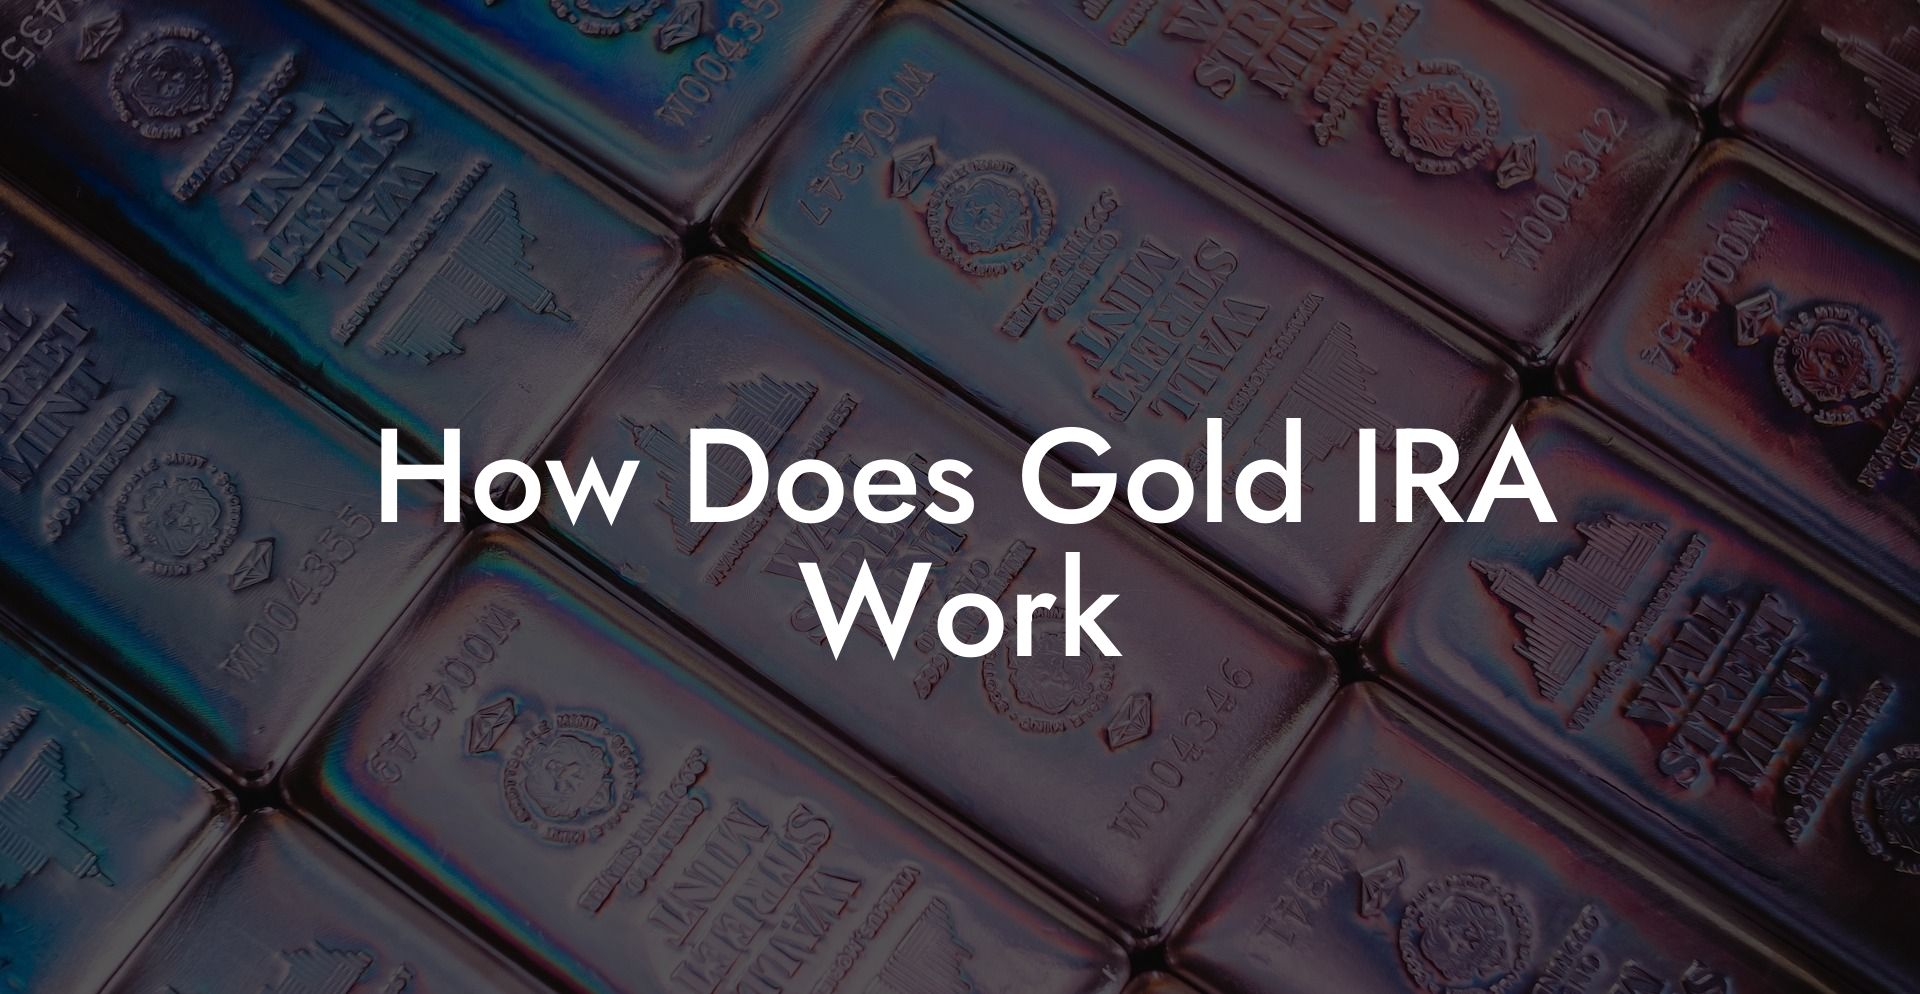 How Does Gold IRA Work